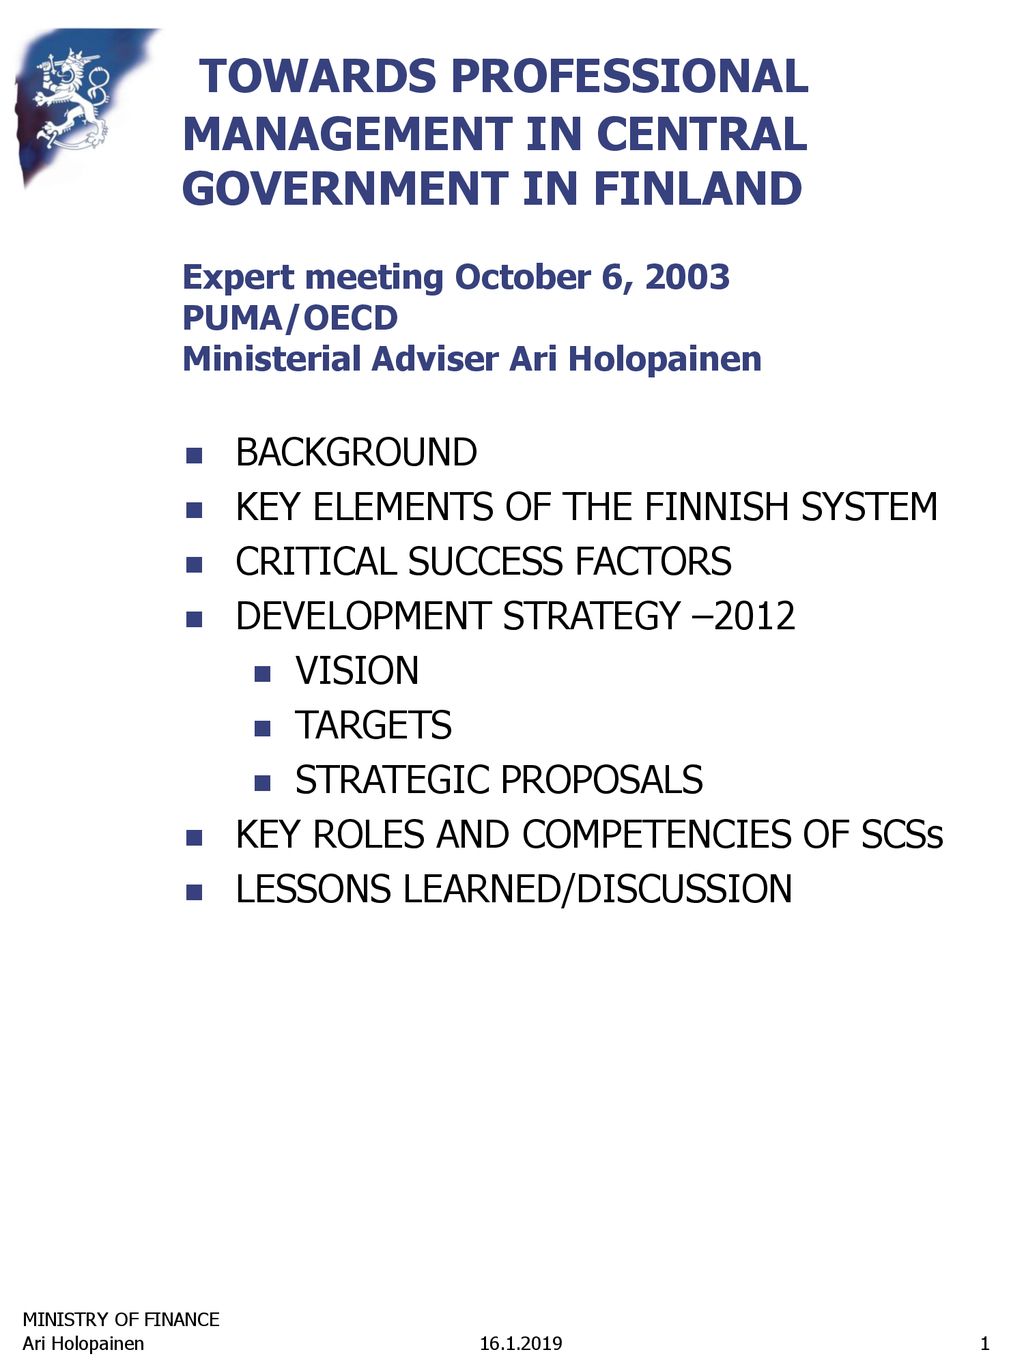 MINISTRY OF FINANCE TOWARDS PROFESSIONAL MANAGEMENT IN CENTRAL GOVERNMENT  IN FINLAND Expert meeting October 6, 2003 PUMA/OECD Ministerial Adviser  Ari. - ppt download